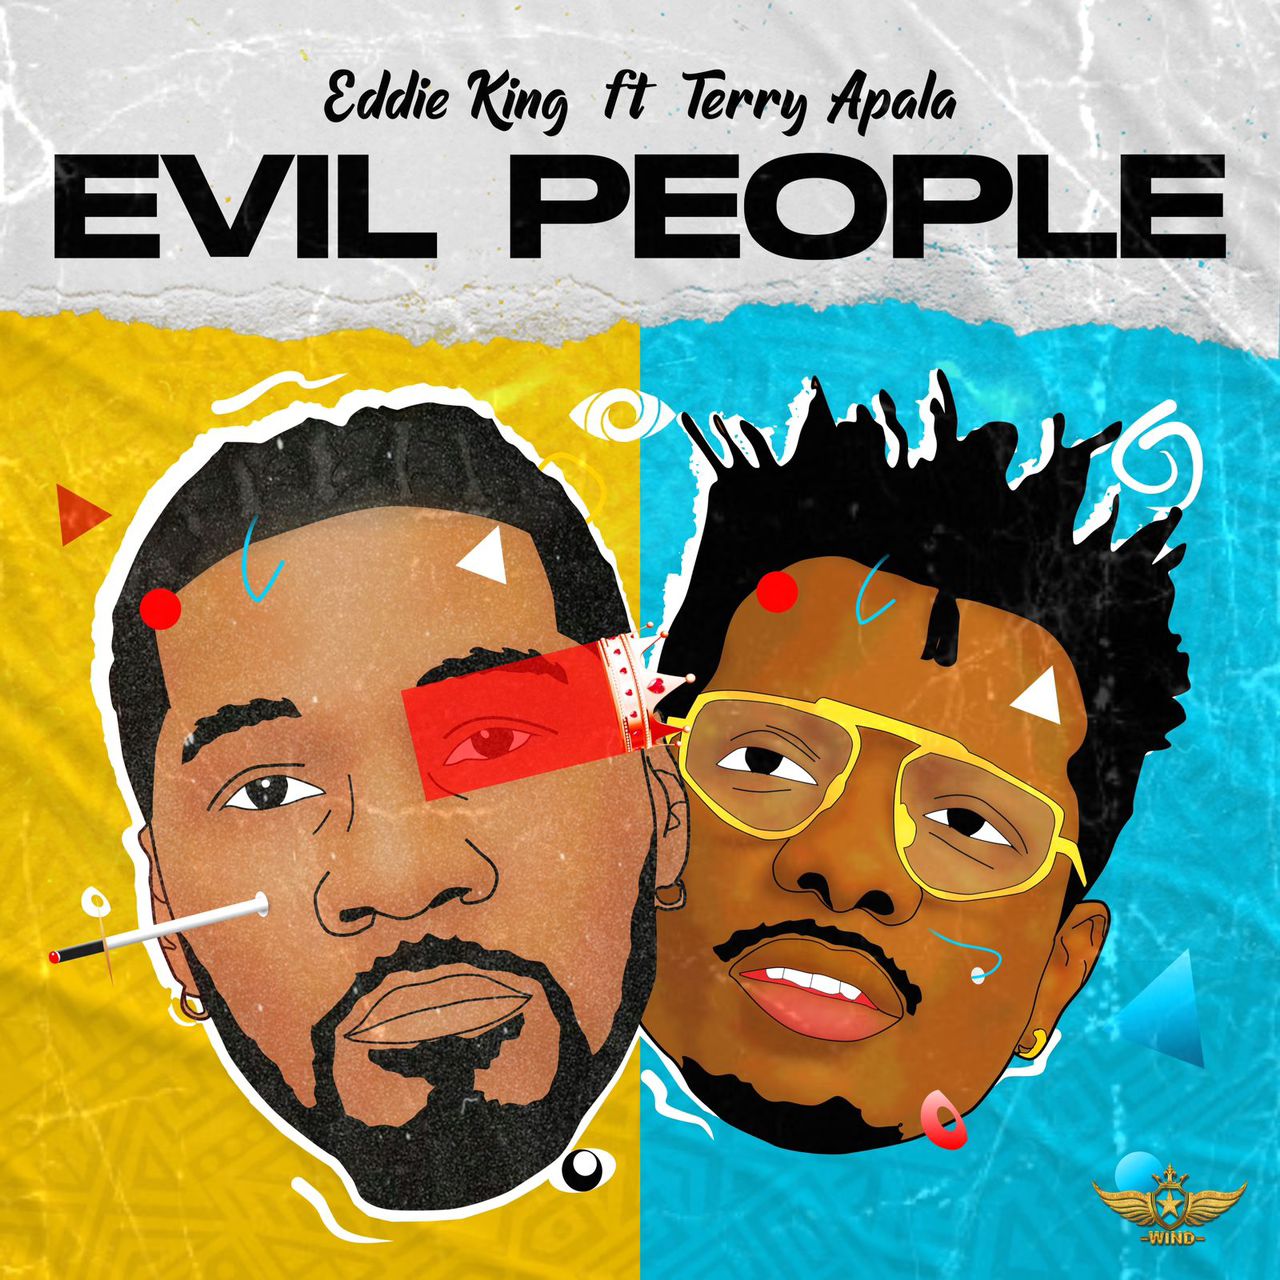 Eddie King drops riveting new track “Evil People” featuring Terry Apala